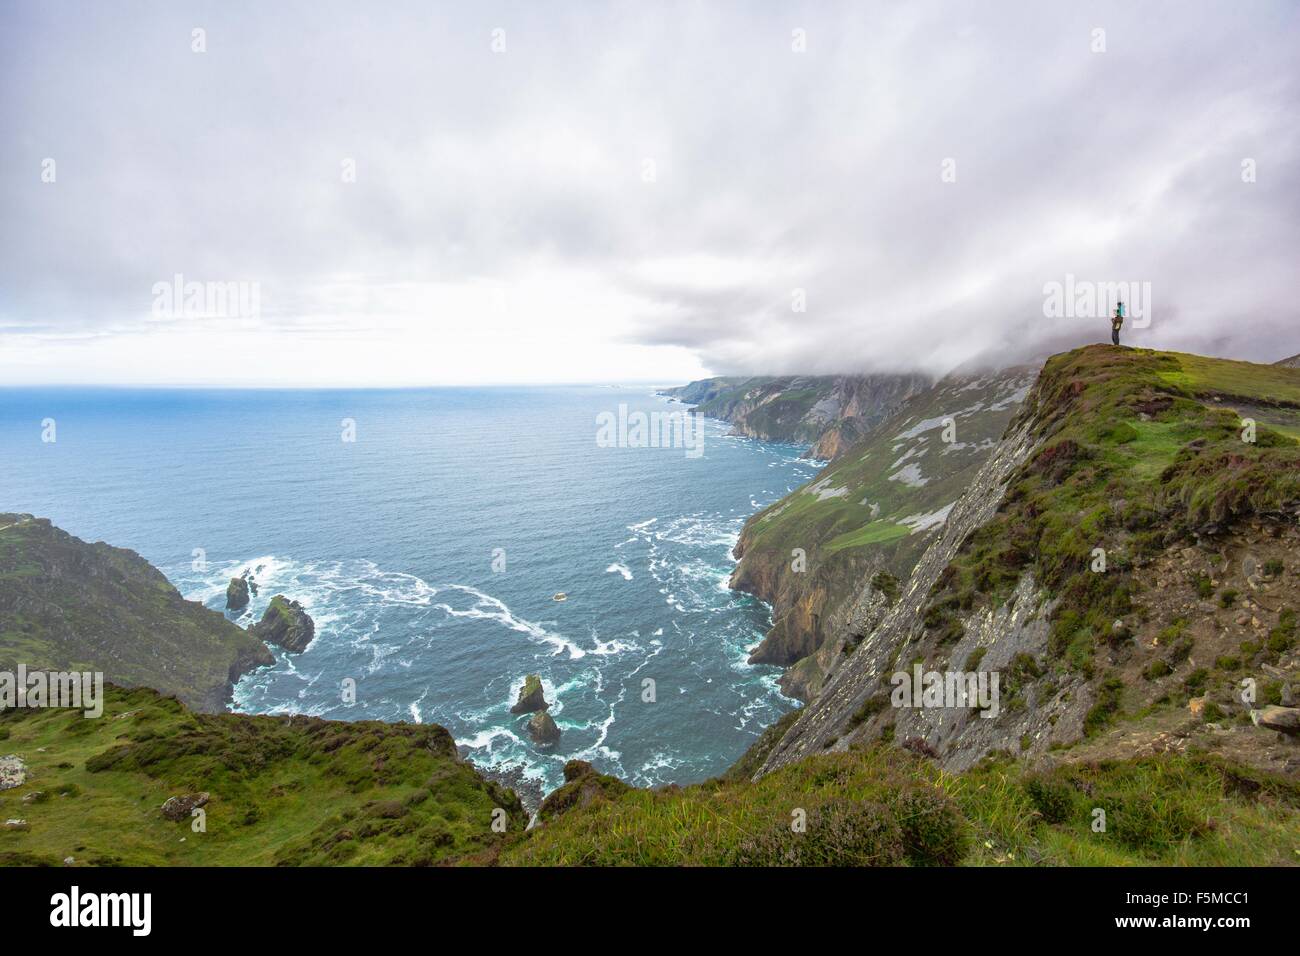 Daughter sitting on fathers shoulders looking at view from cliff, Slieve League, County Donegal, Ireland Stock Photo